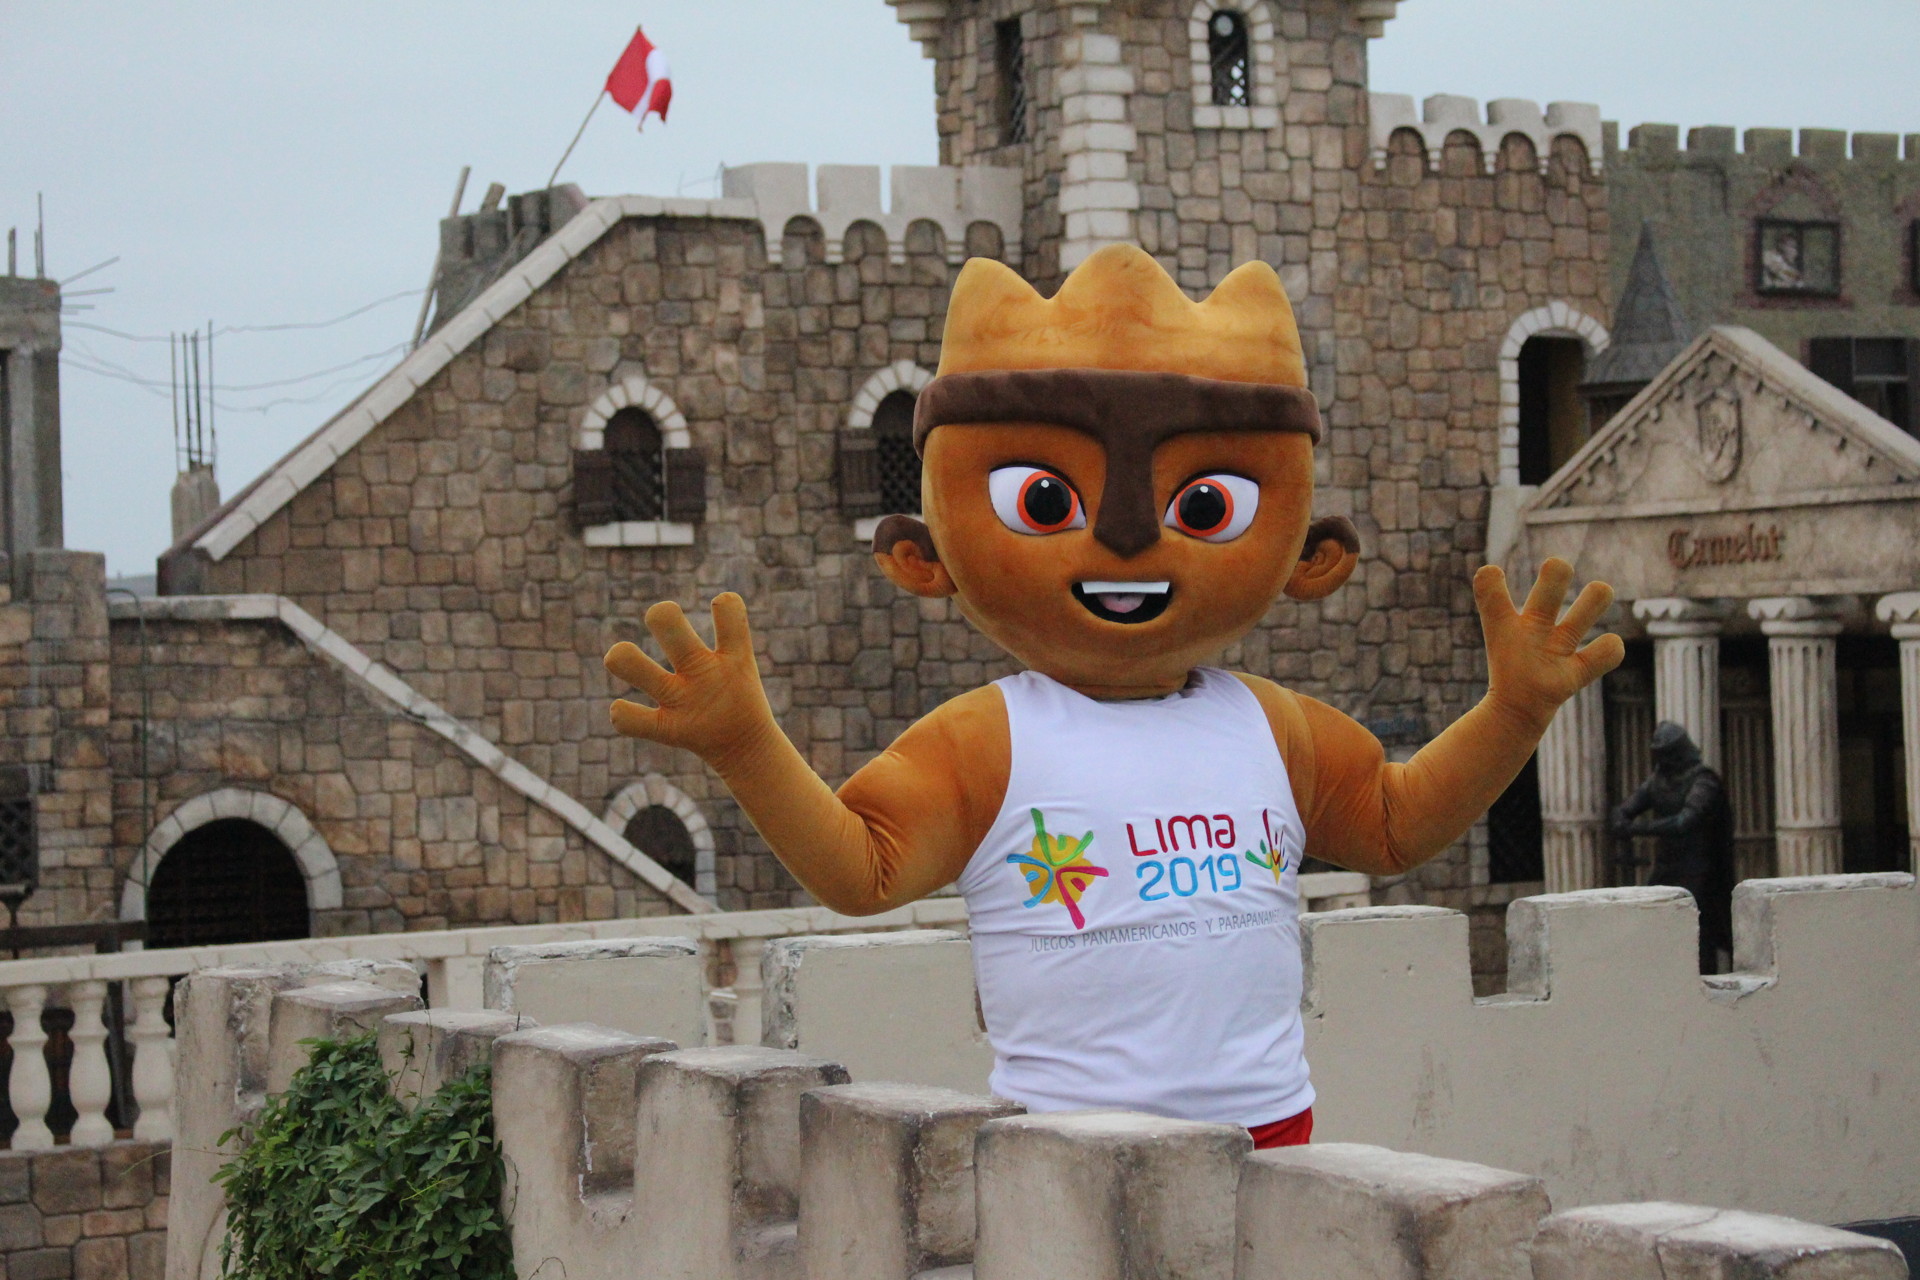 Lima 2019 mascot poses for a picture